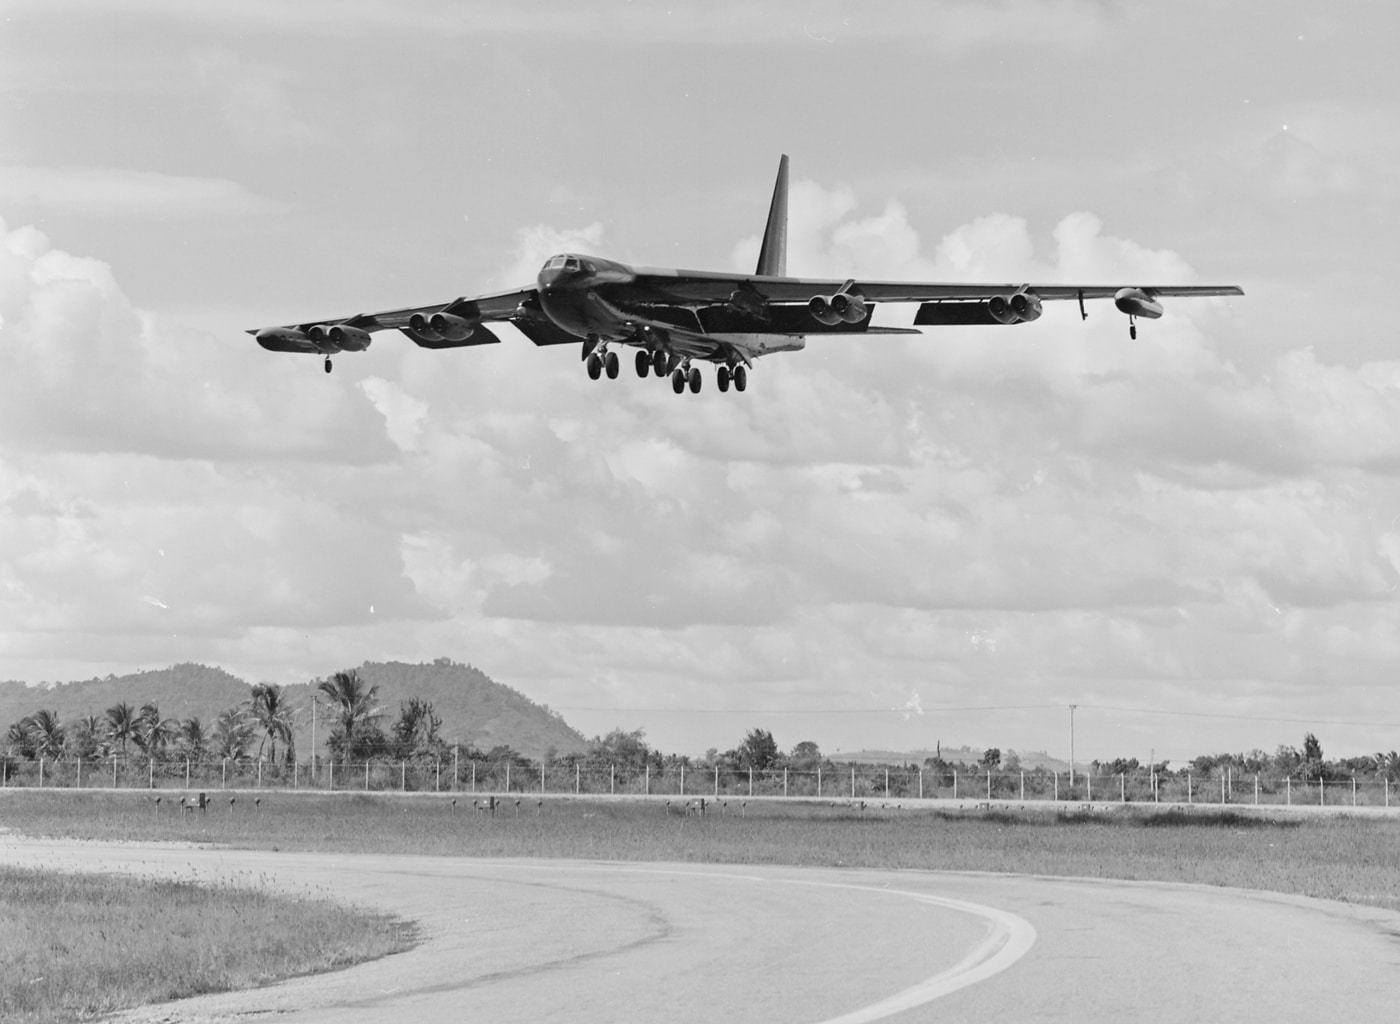 b-52 returning from a mission over vietnam